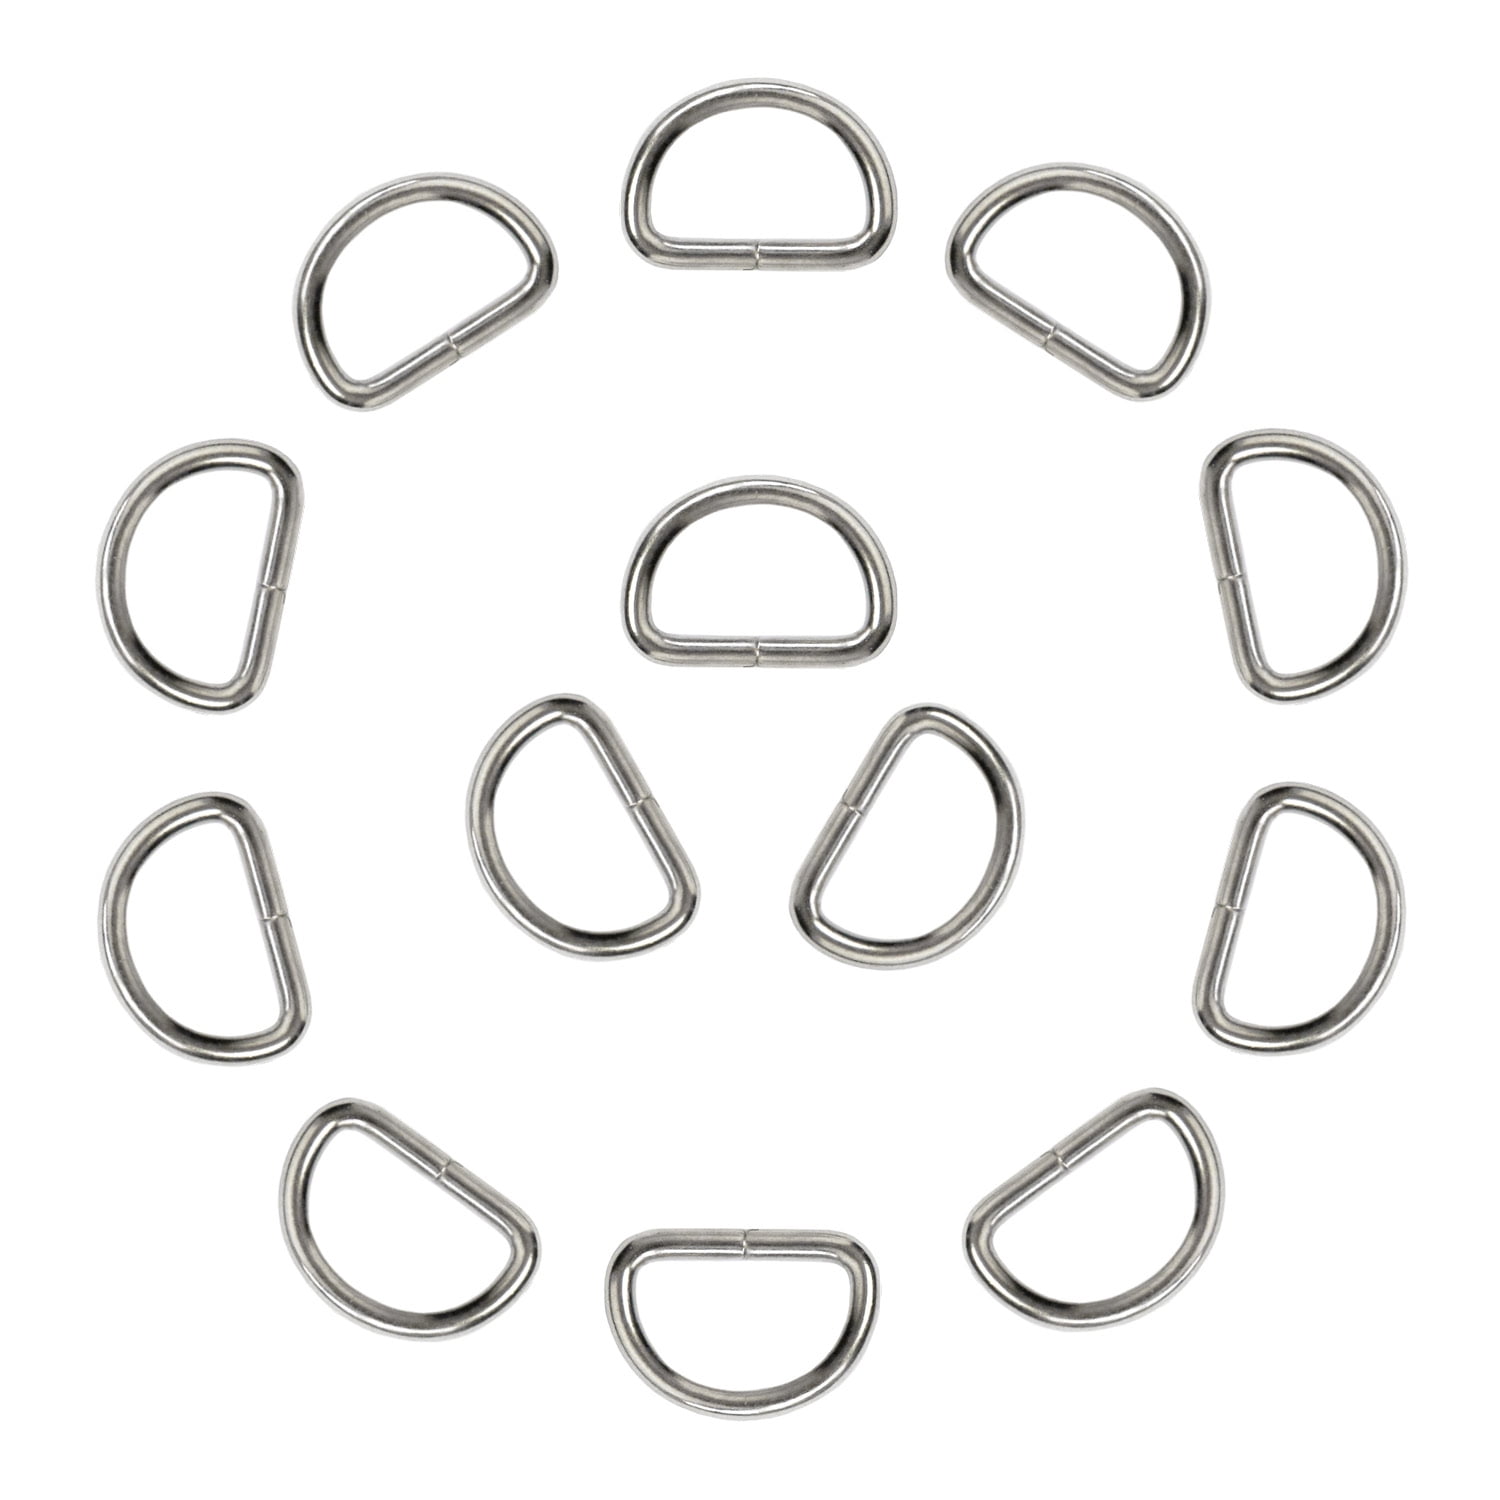 Metal D Ring Non Welded D-Rings Electroplated Black 1 Inch (100 Pack)